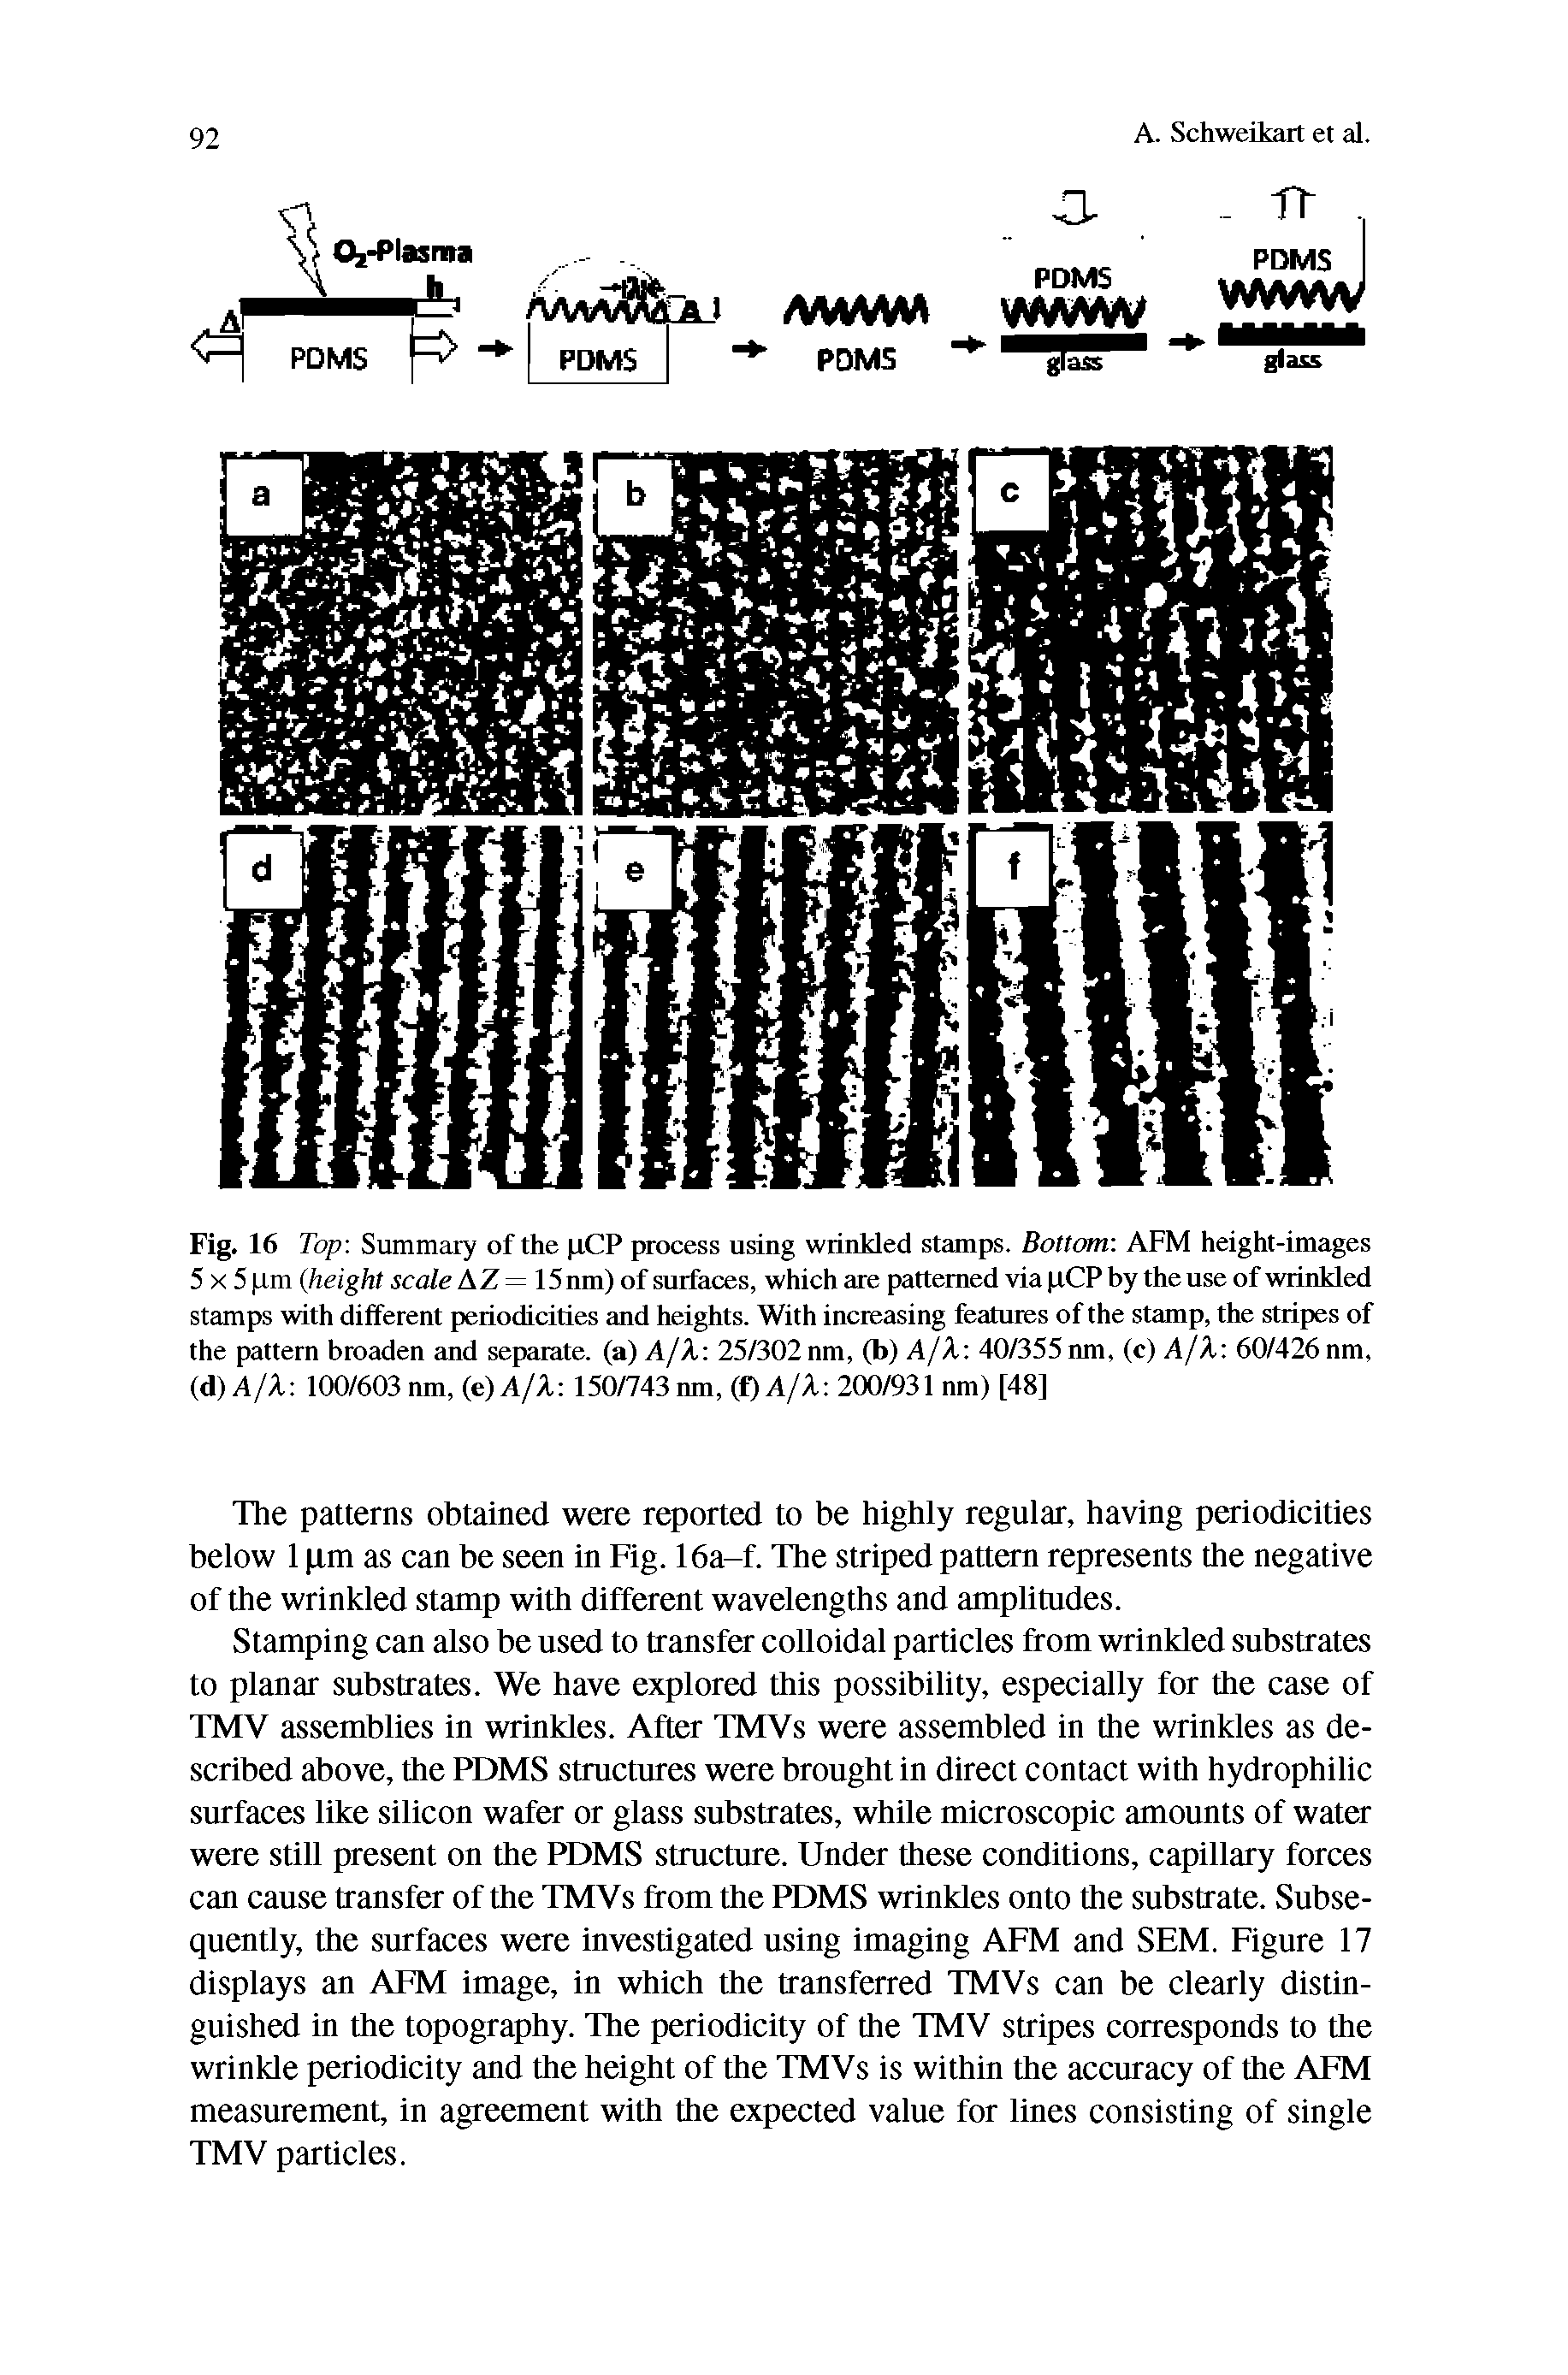 Fig. 16 Top-. Summary of the p.CP process using wrinkled stamps. Bottom AFM height-images 5 x 5 Llm (height scale AZ= 15nm) of surfaces, which are patterned via pCP by the use of wrinkled stamps with different periodicities and heights. With increasing features of the stamp, the stripes of the pattern broaden and separate, (a) A/X 25/302 nm, (b) A/X 40/355nm, (c) A/X 60/426 nm, A) A/X 100/603 nm, (c)A/X 150/743 nm, (f)A/X 200/931 nm) [48]...